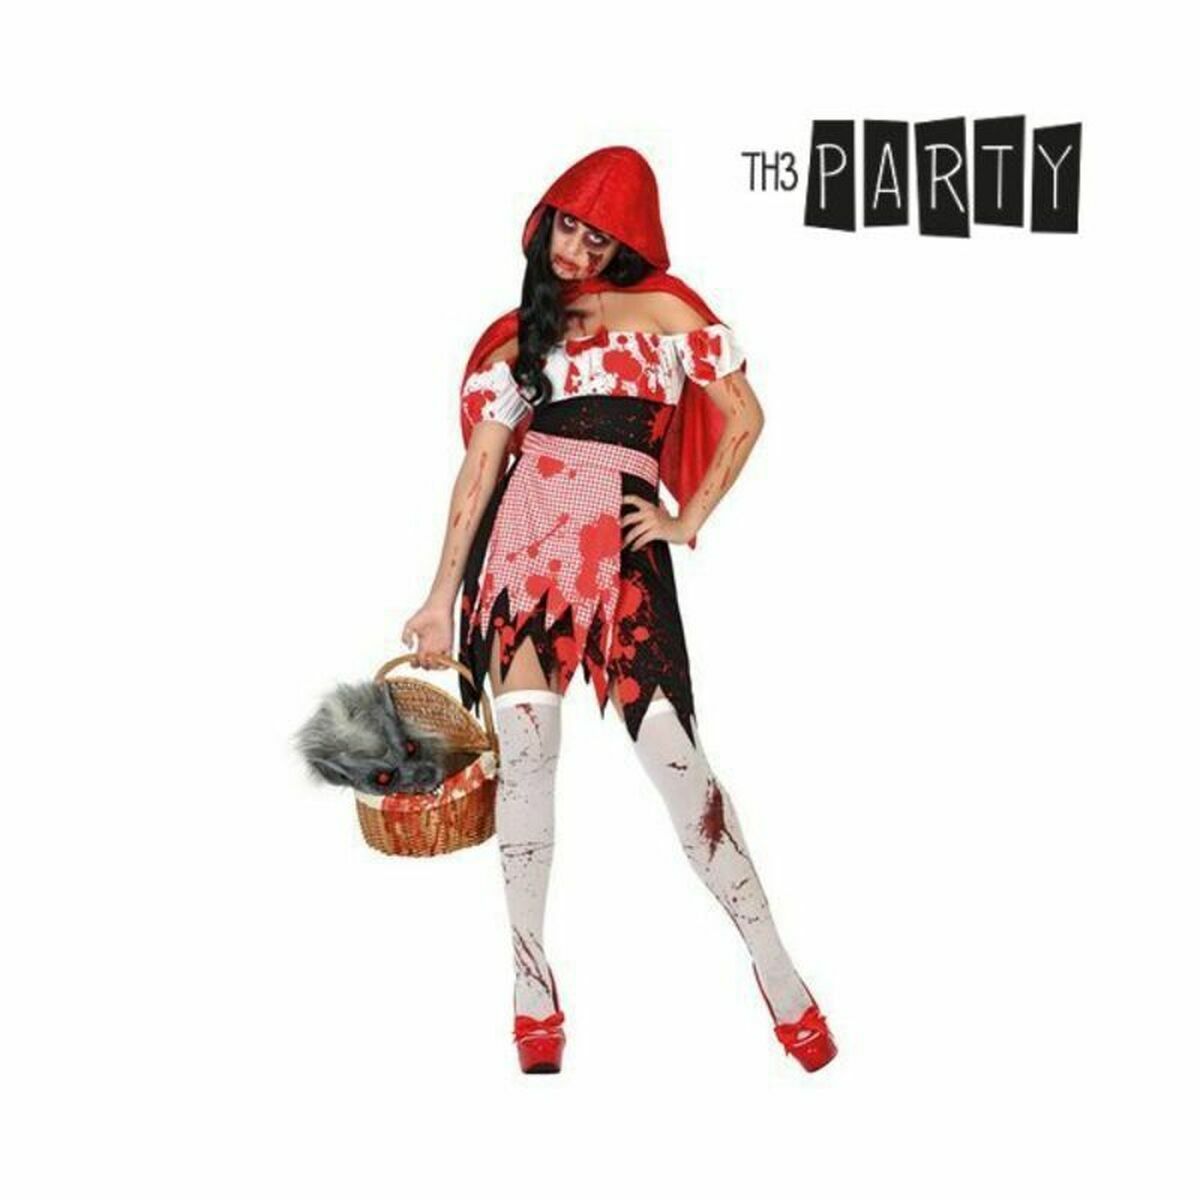 Costume for Adults Th3 Party Little Red Riding Hood Size XL (Refurbished B)